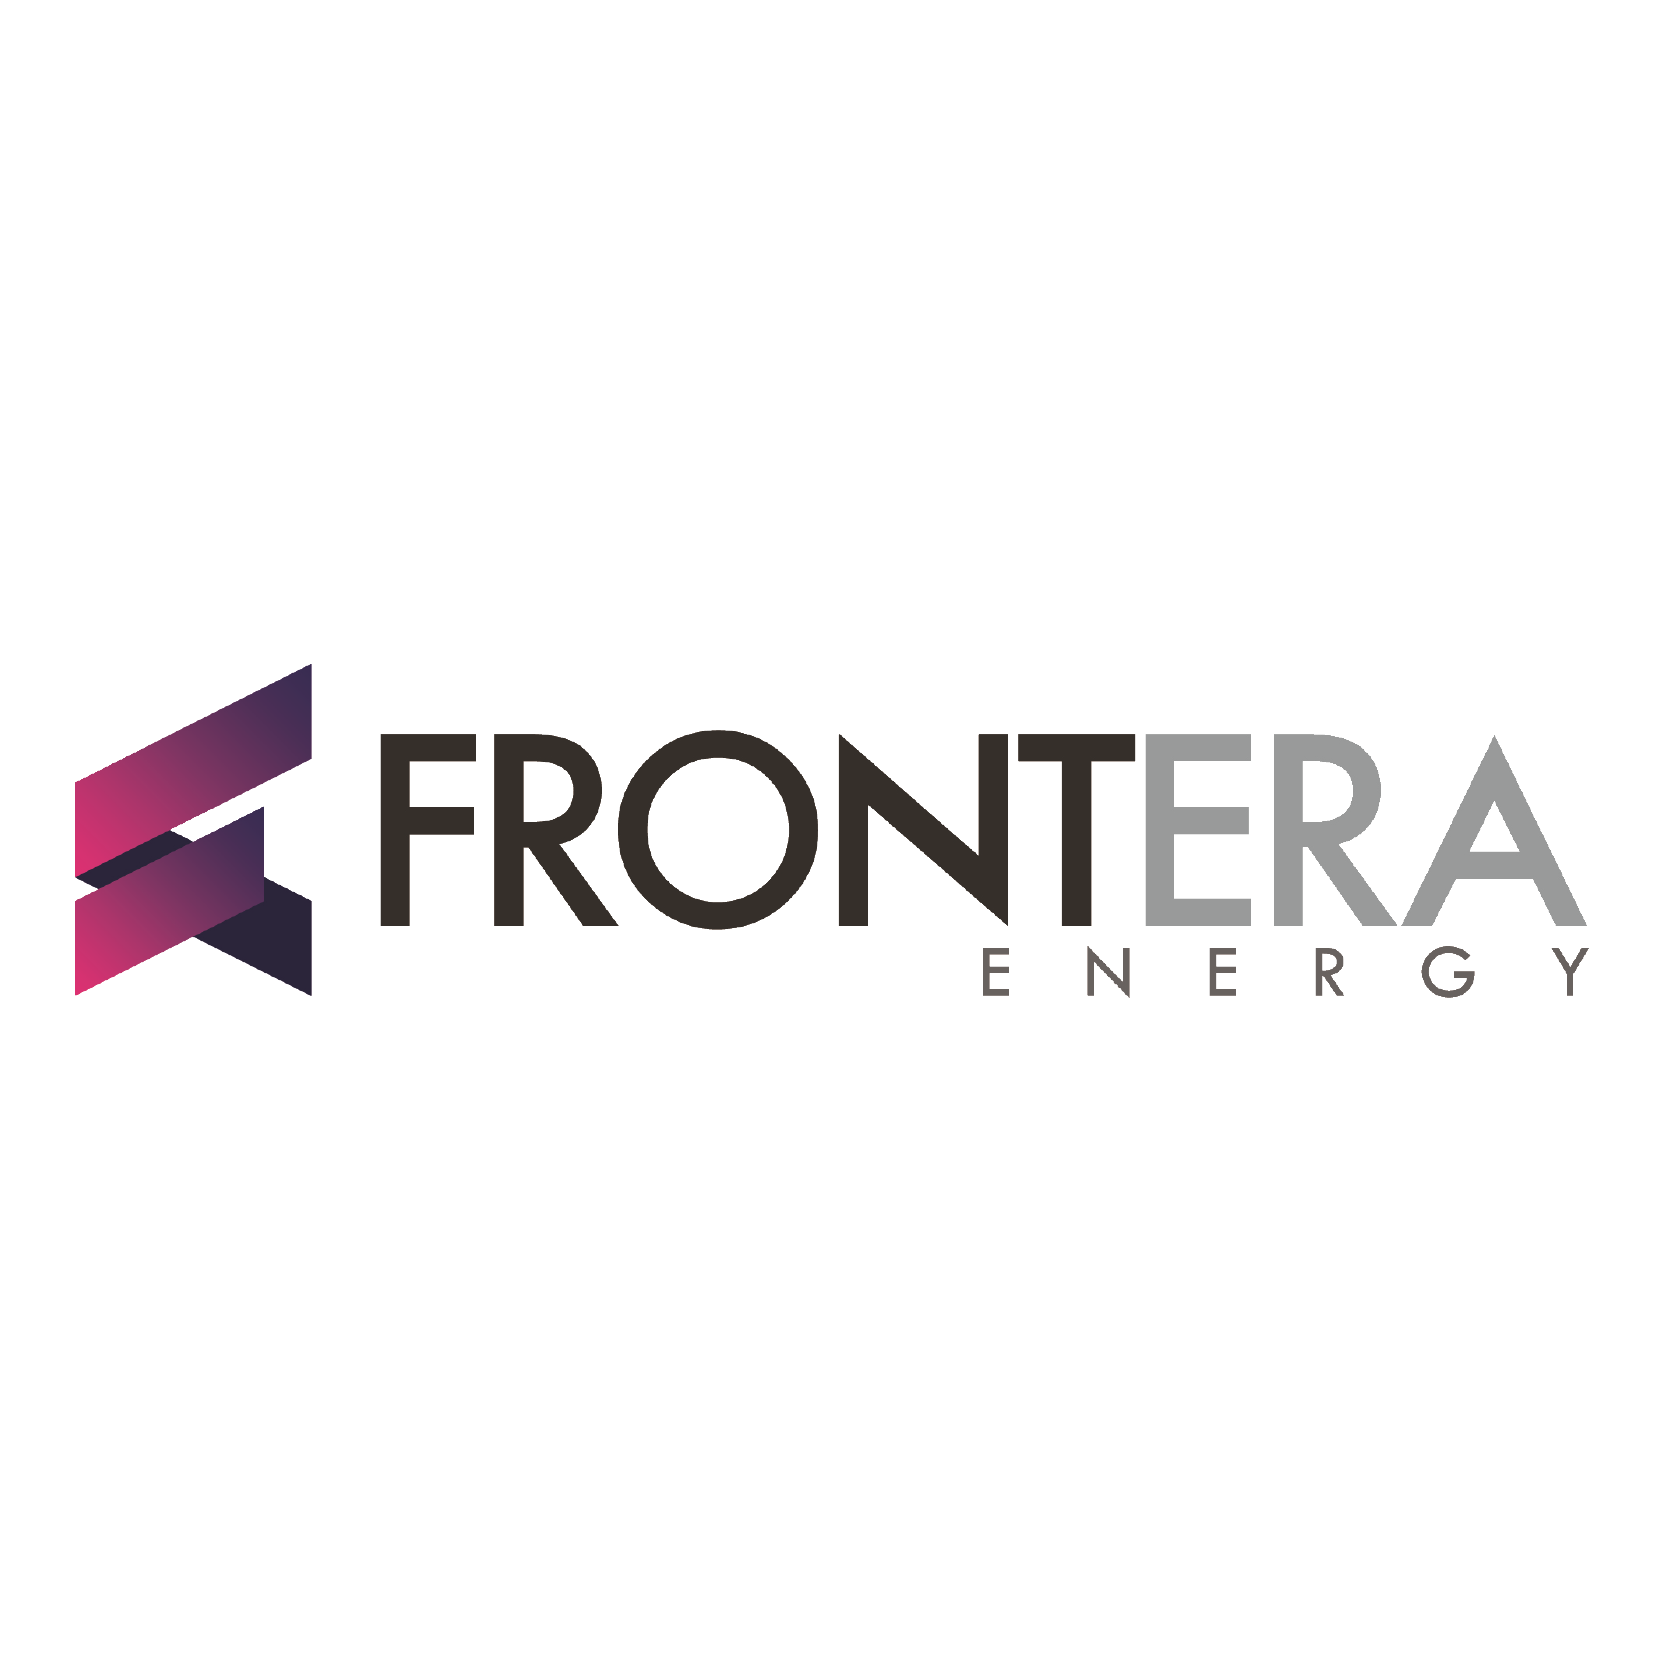 41_frontera energy.png